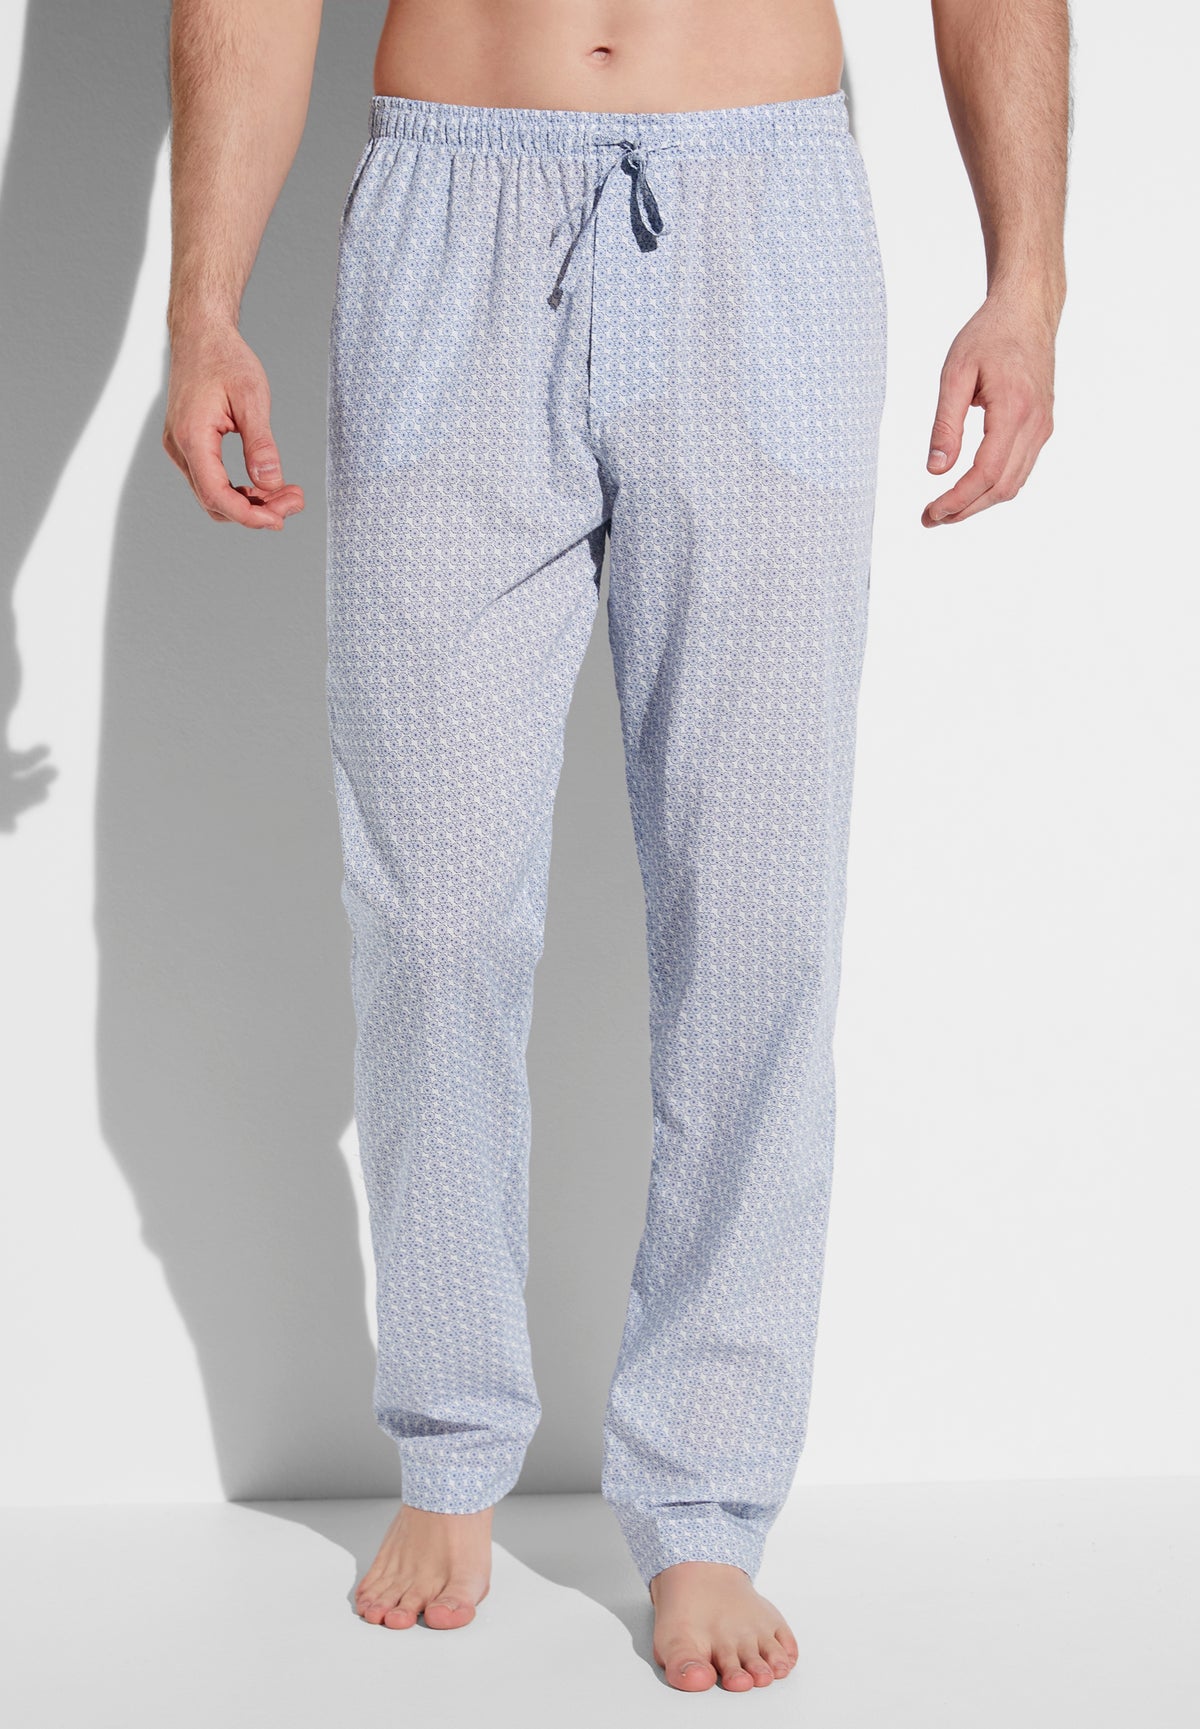 Cotton Voile Print | Hose lang - disty-geo white